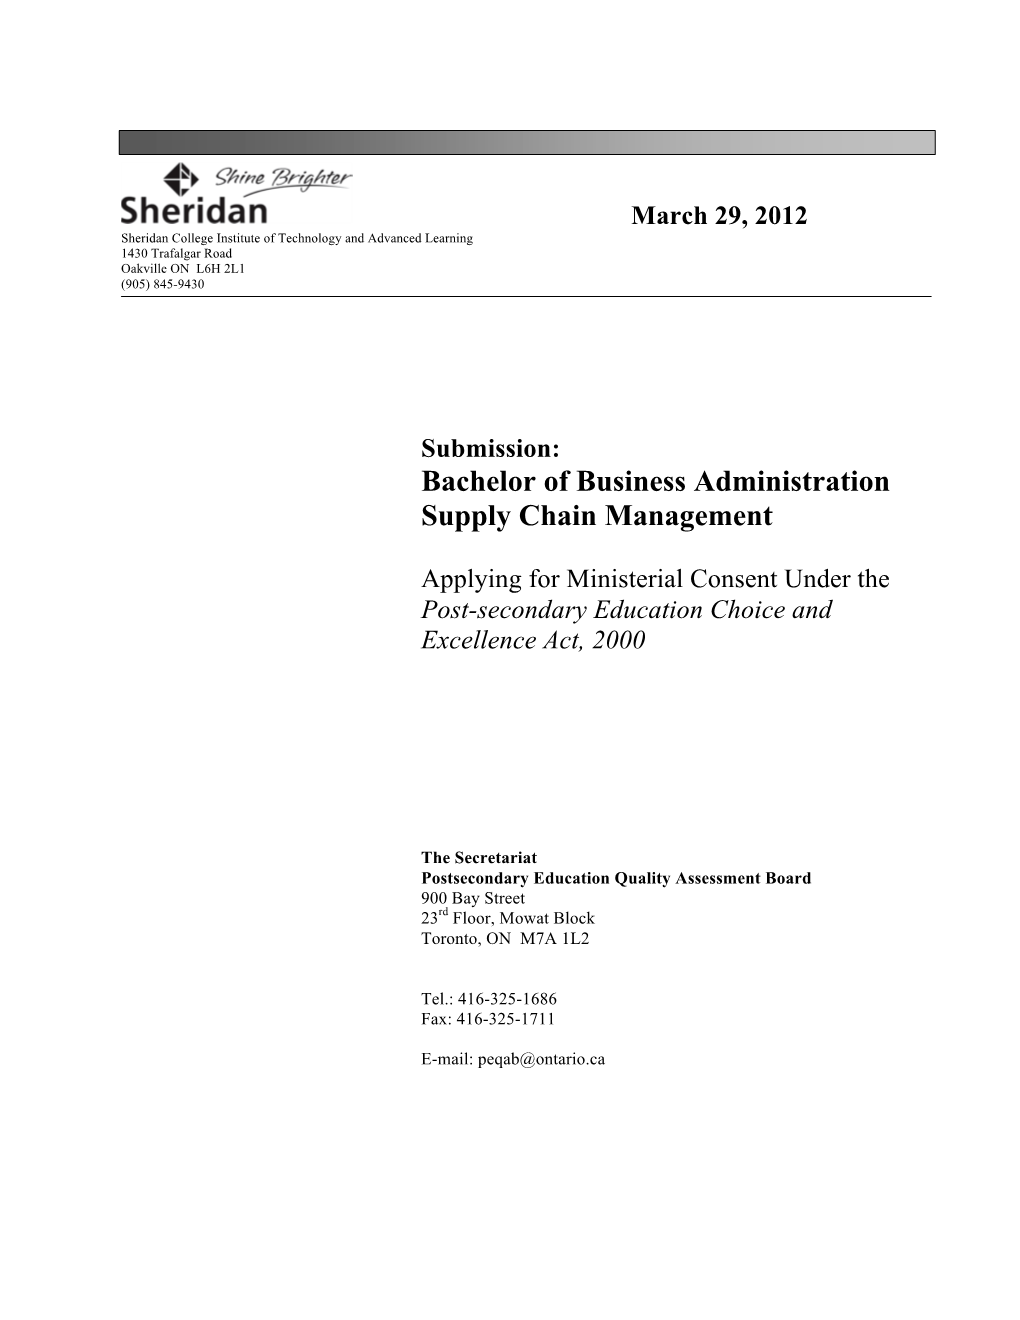 Bachelor of Business Administration Supply Chain Management